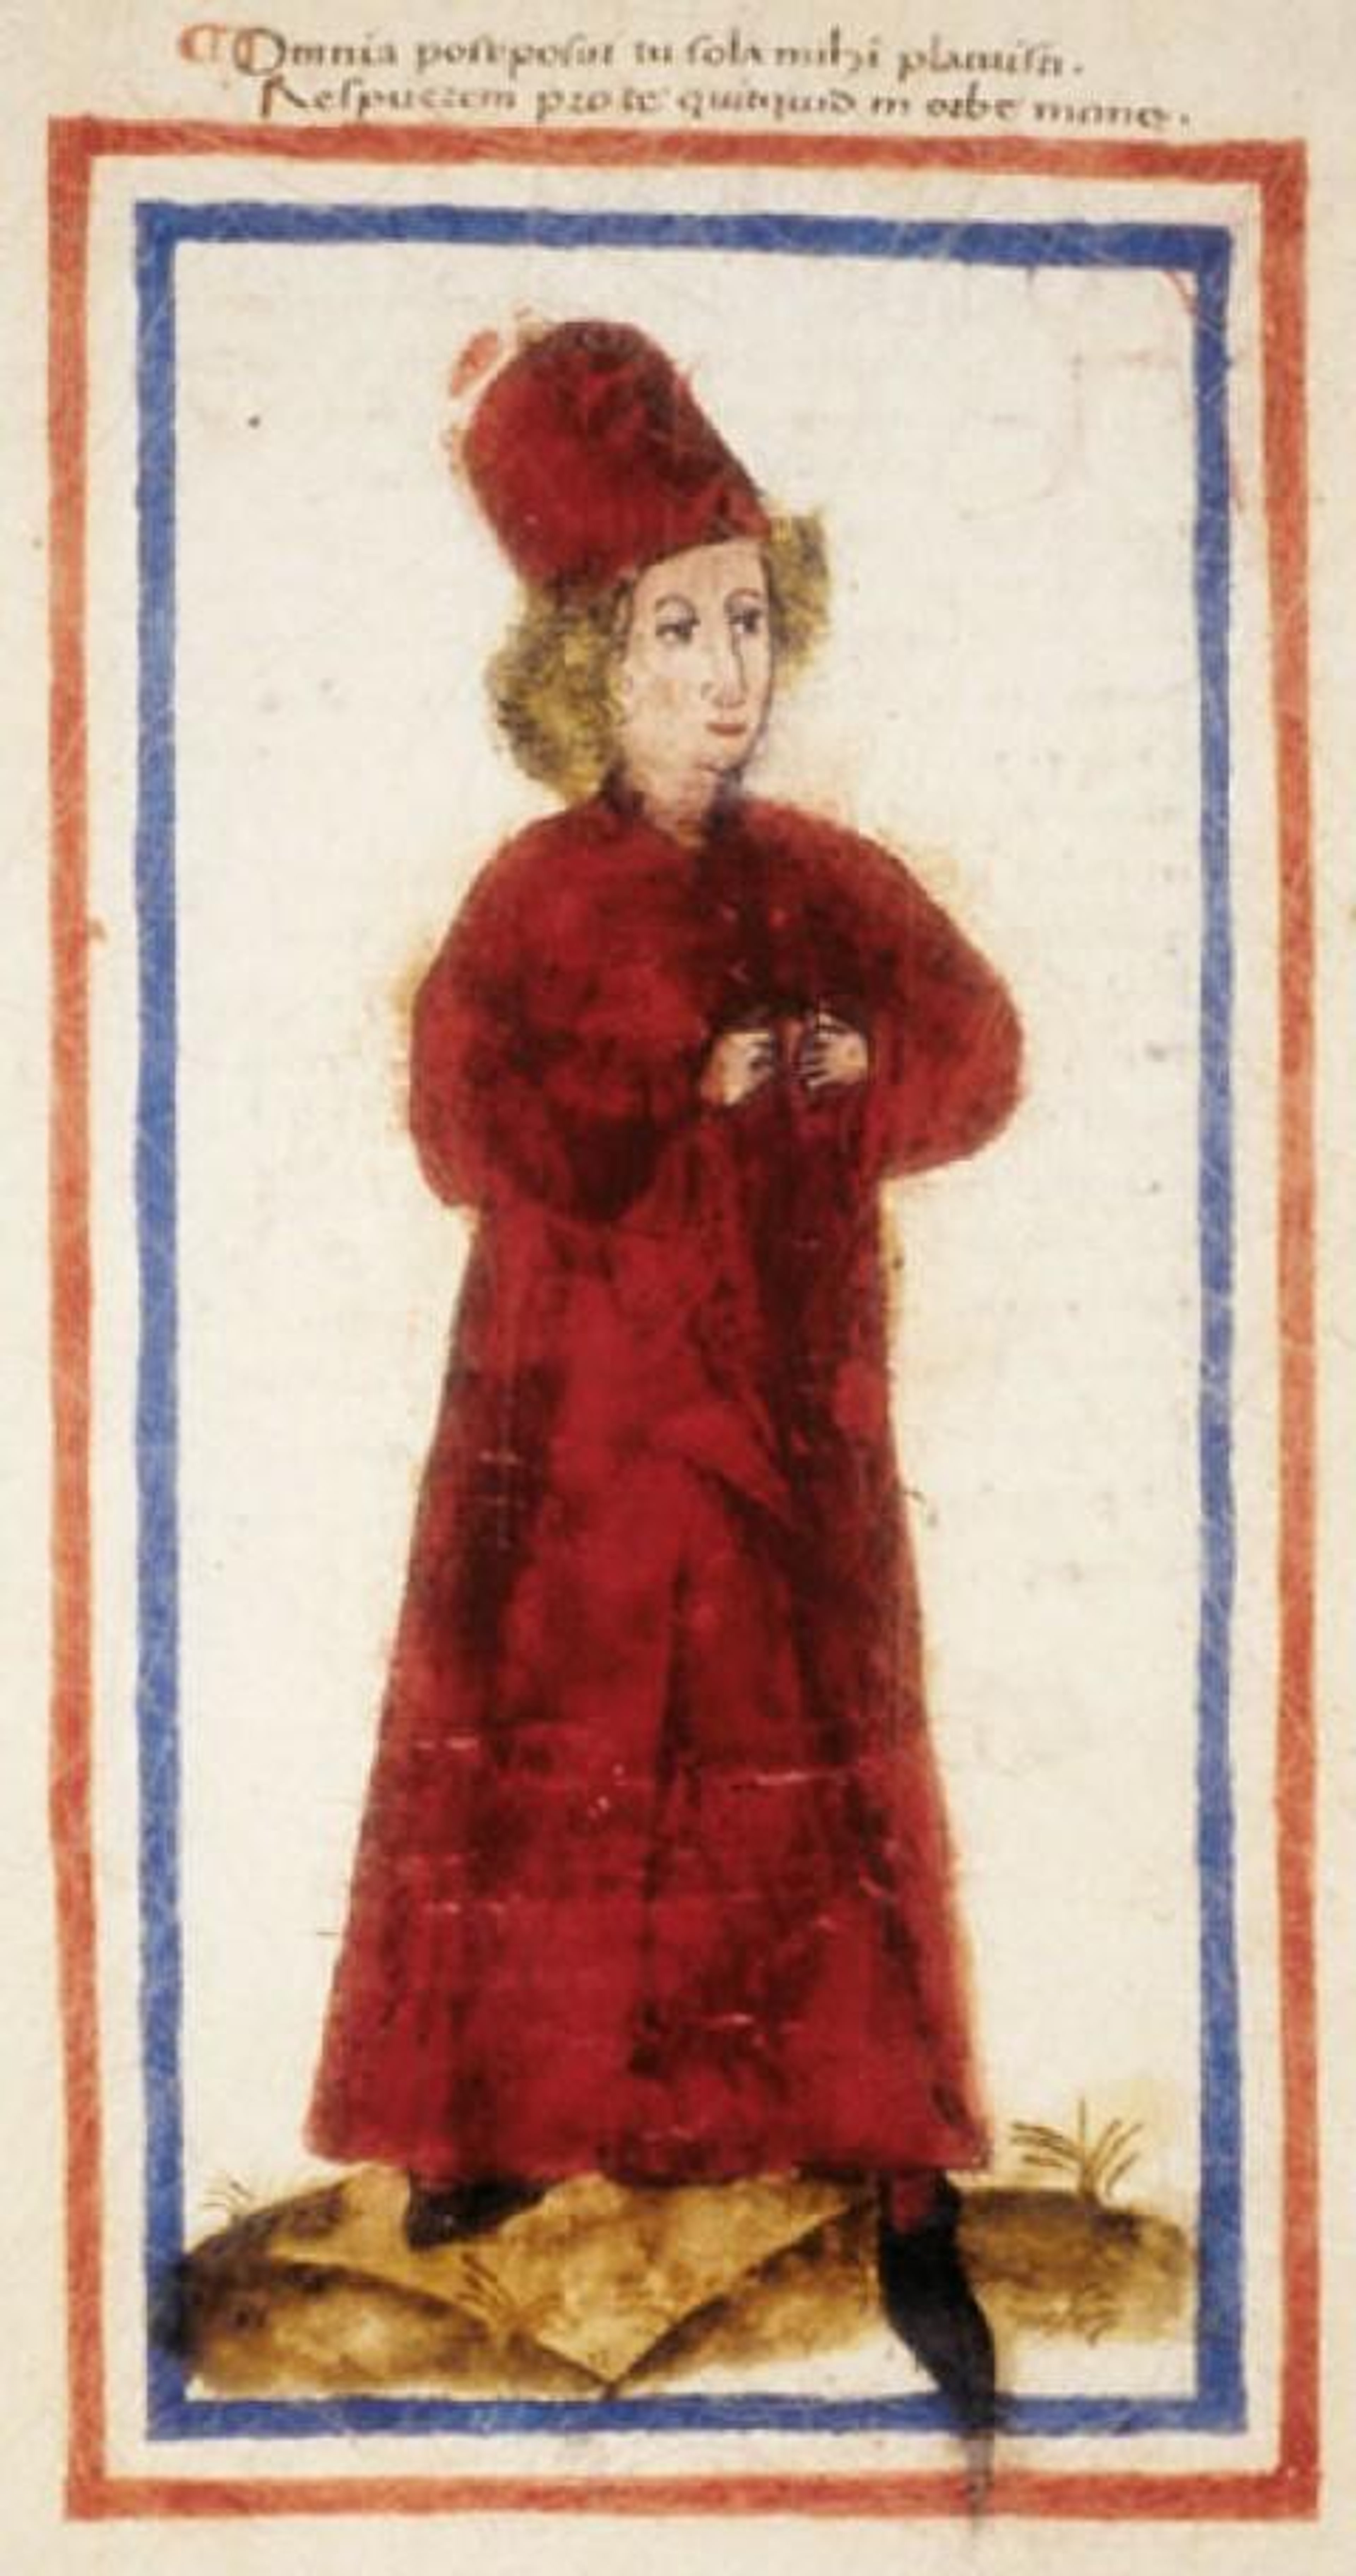 Full body portrait of Hartmann Schedel, a man with long blonde hair, wearing a red robe and hat.